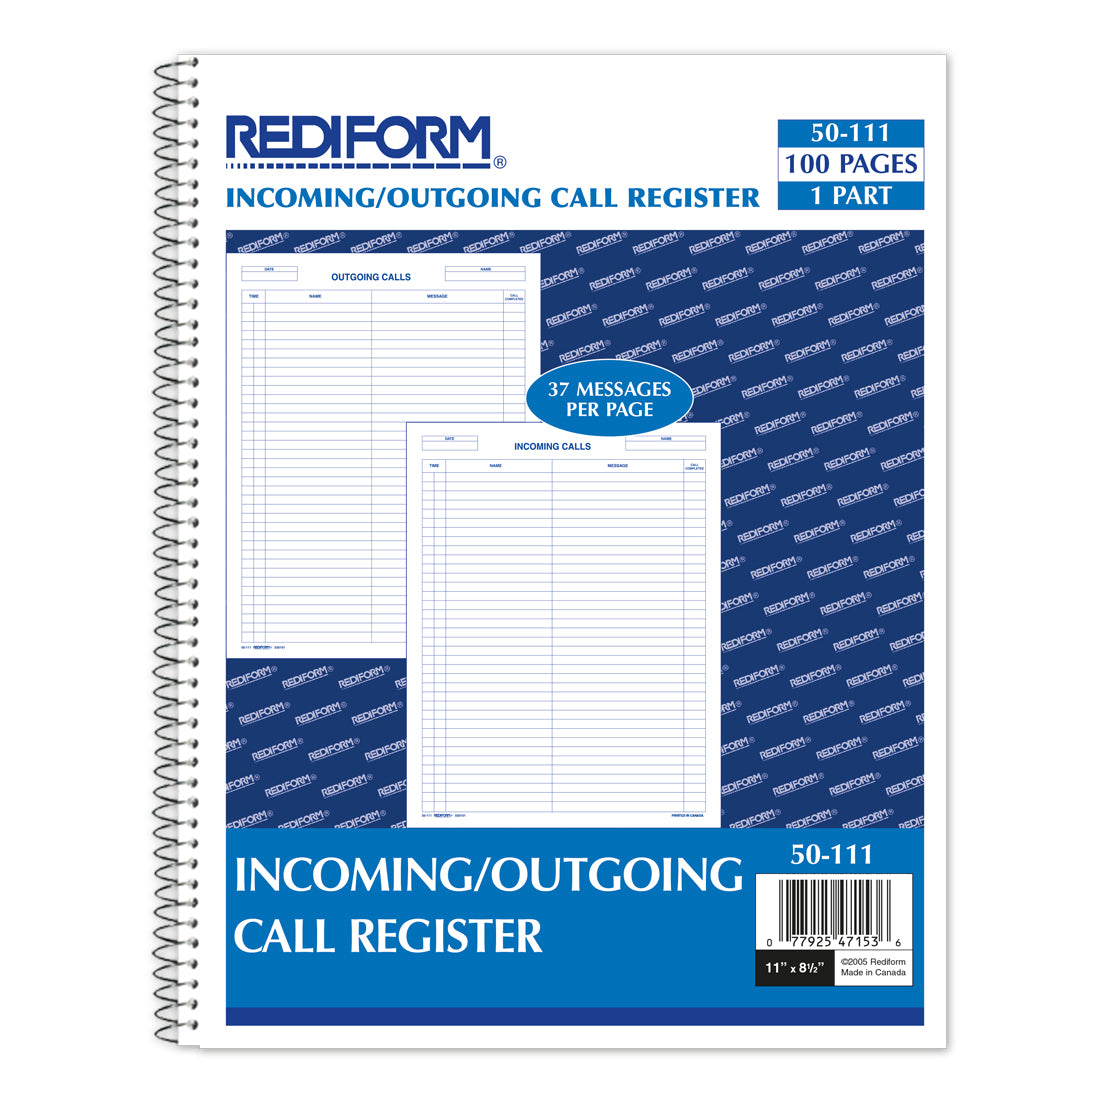 Incoming/Outgoing Call Register Book 50111